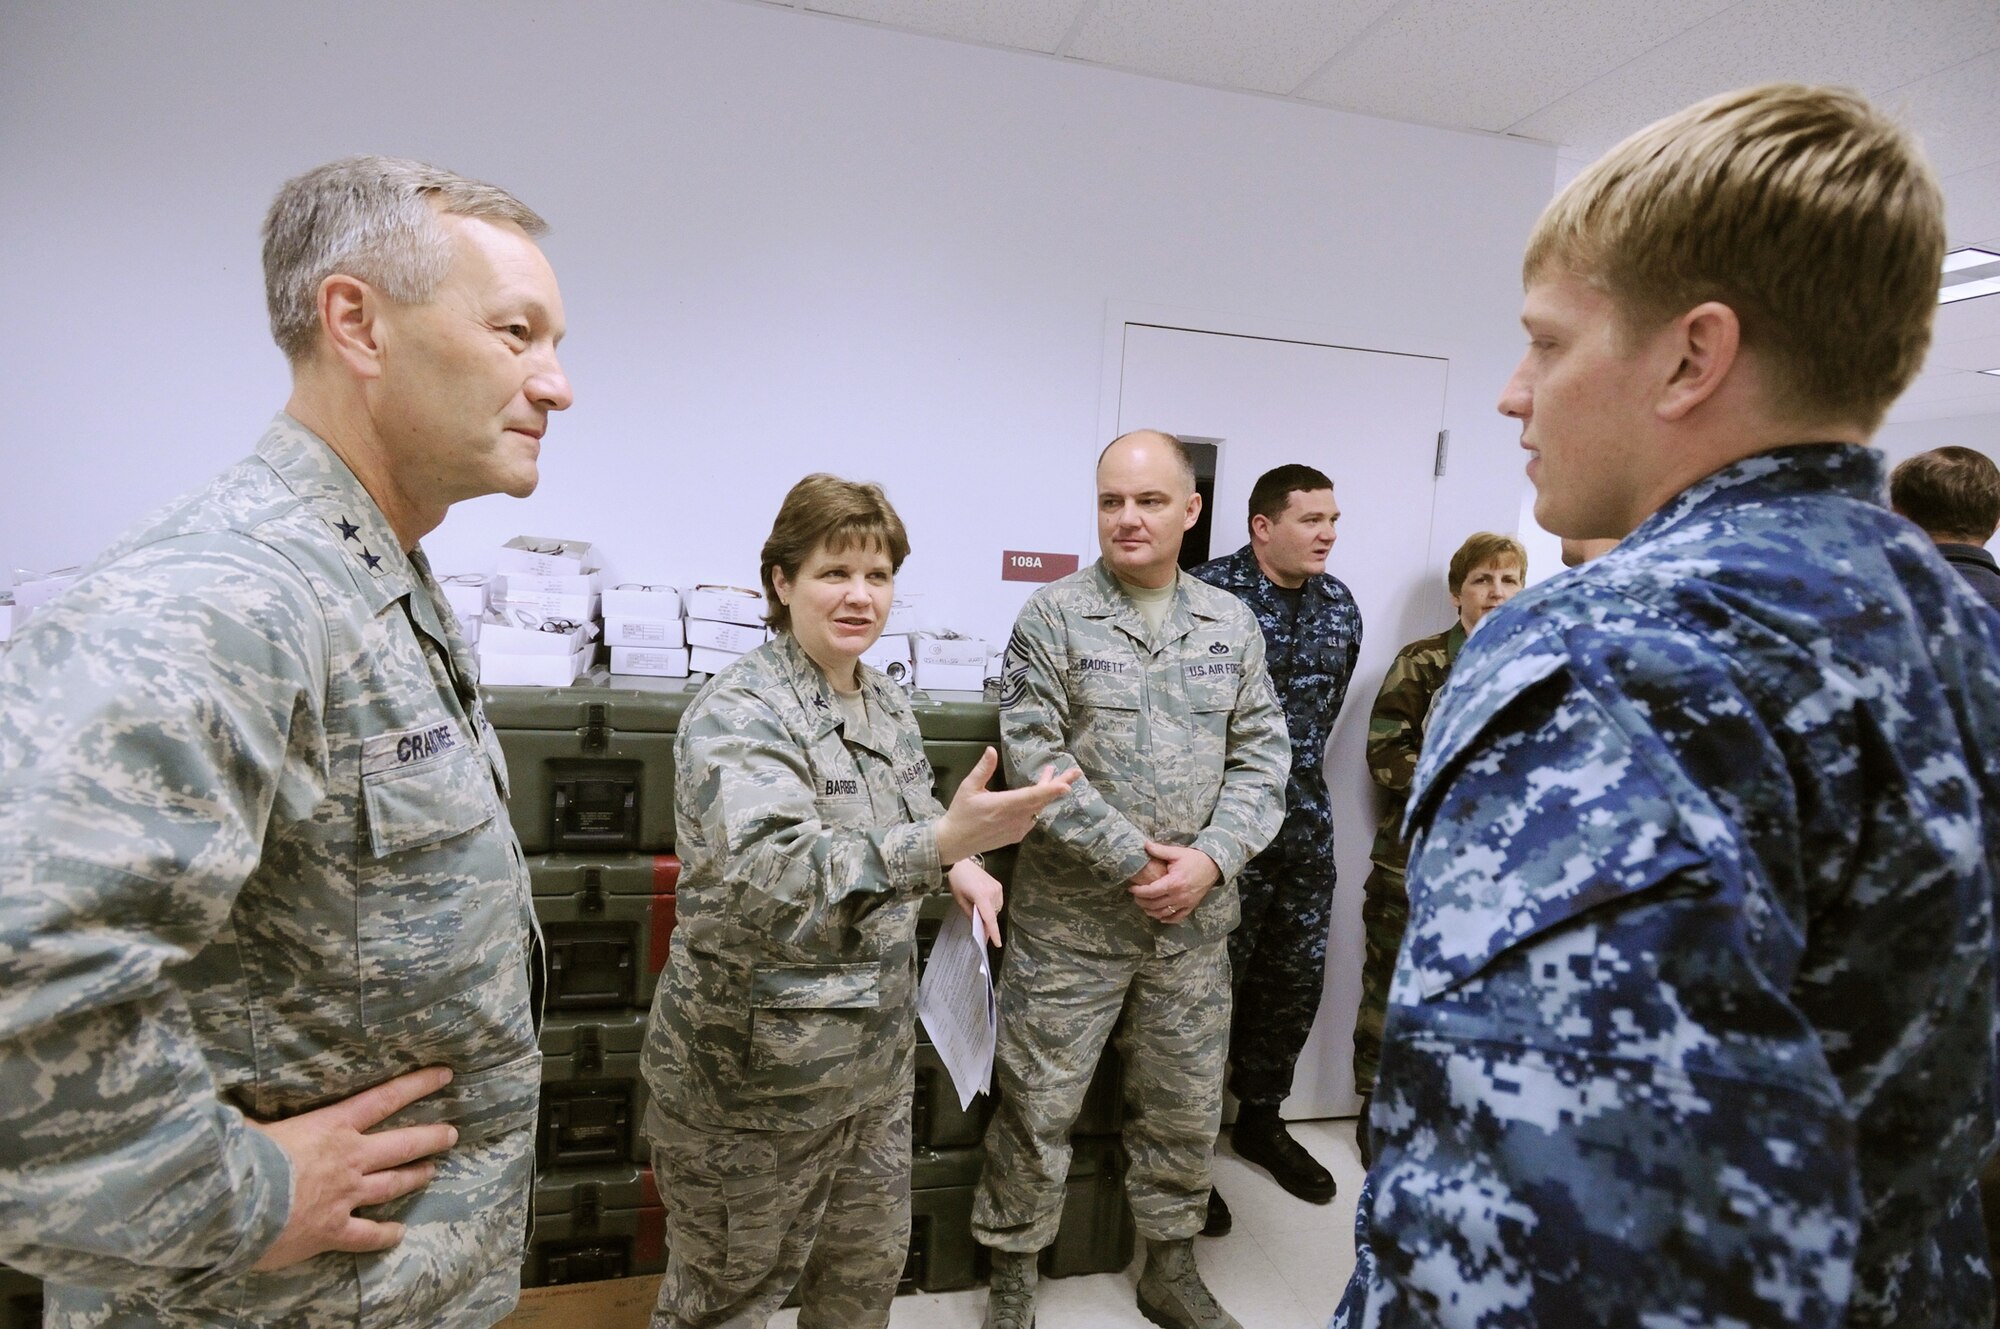 Maj. Gen. Eric W. Crabtree and Col. Christine Barber talk with members of a Navy optometry team April 17, 2010, who are participating in Operation Artic Care in Kotzebue, Alaska.  General Crabtree is the commander of the Air Force Reserve Command's 4th Air Force and Colonel Barber is the Operation Arctic Care project manager. (U.S. Air Force photo/Tech. Sgt. Melissa E. Chatham)